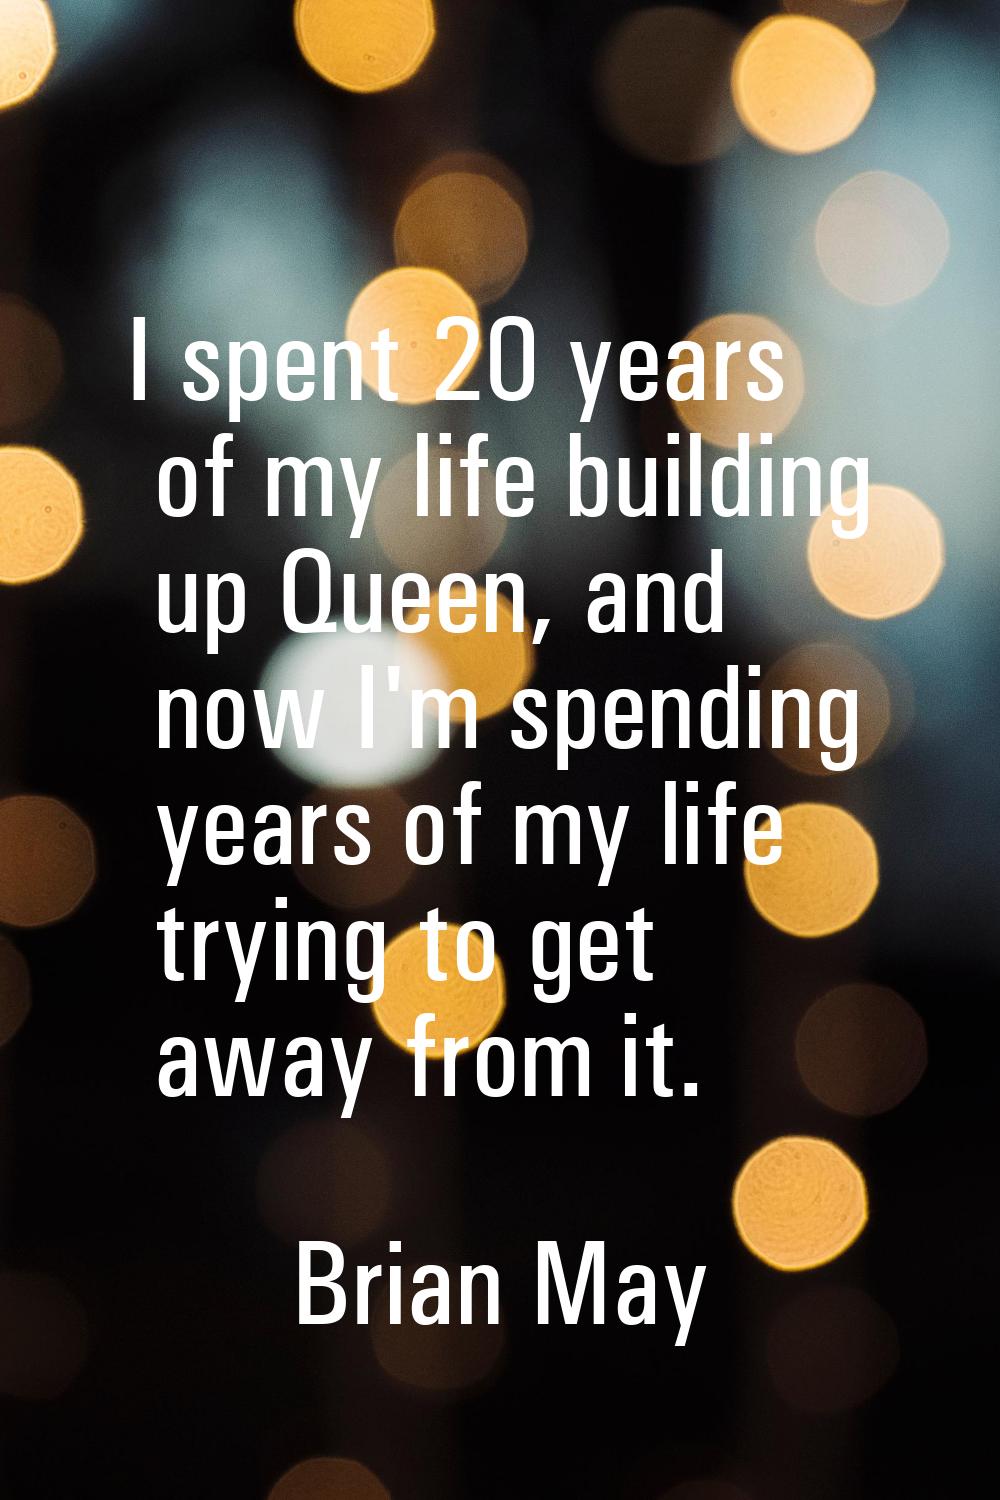 I spent 20 years of my life building up Queen, and now I'm spending years of my life trying to get 